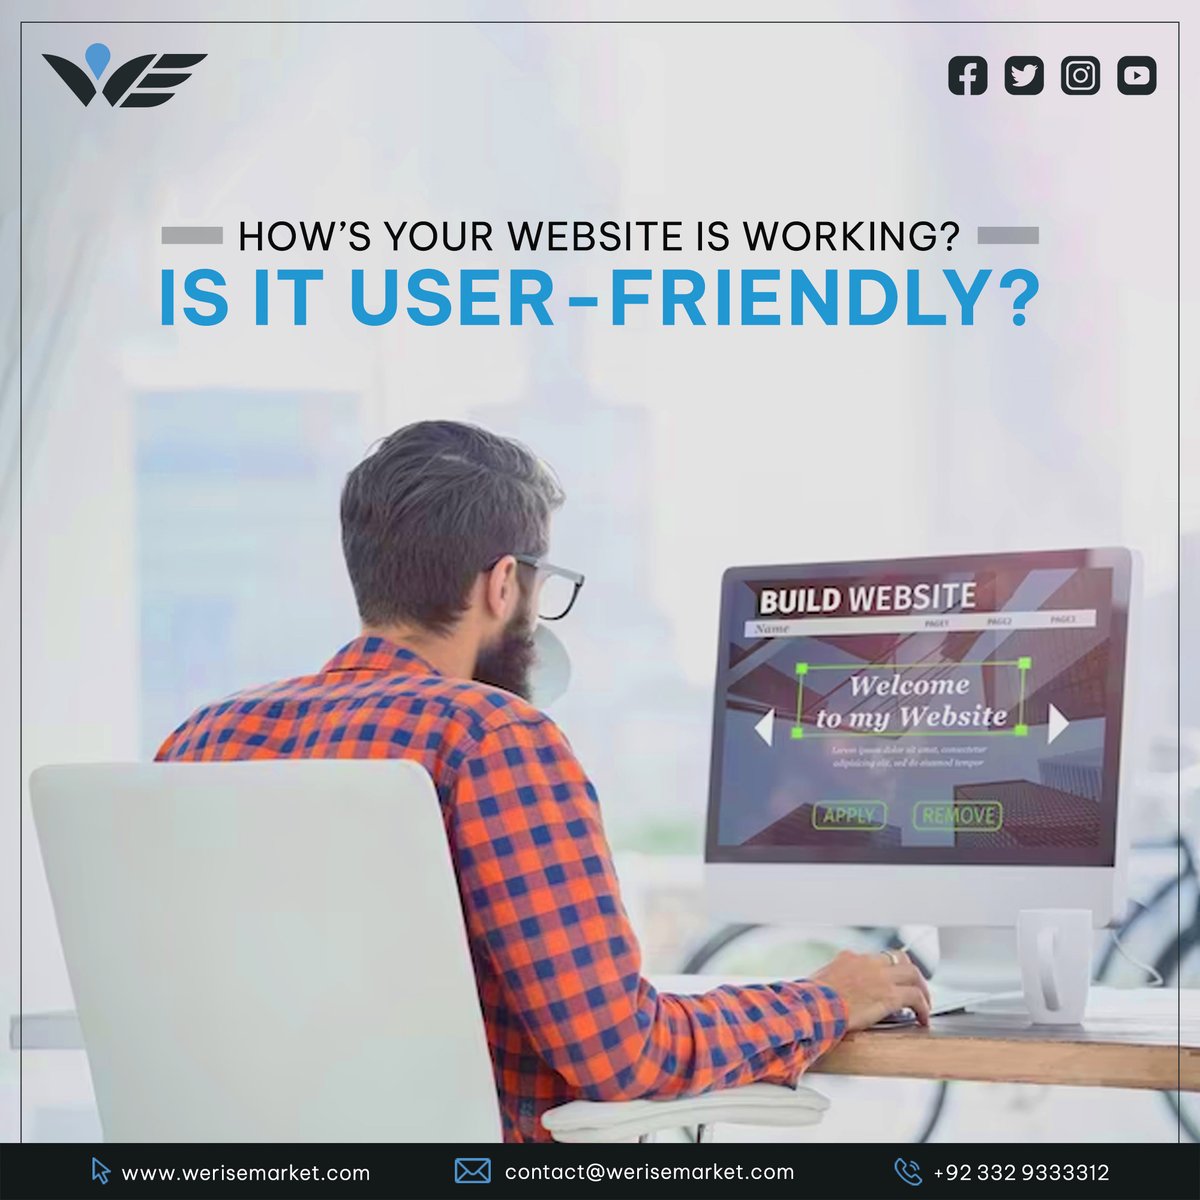 At 𝐖𝐞 𝐑𝐢𝐬𝐞 𝐌𝐚𝐫𝐤𝐞𝐭, we believe in creating a website that not only does justice to your brand's presence but also makes your audience fall in love with it from the moment they land on it. Reach us! 𝐂𝐚𝐥𝐥+92 332 933 3312 𝐖𝐞𝐛𝐬𝐢𝐭𝐞: werisemarket.com